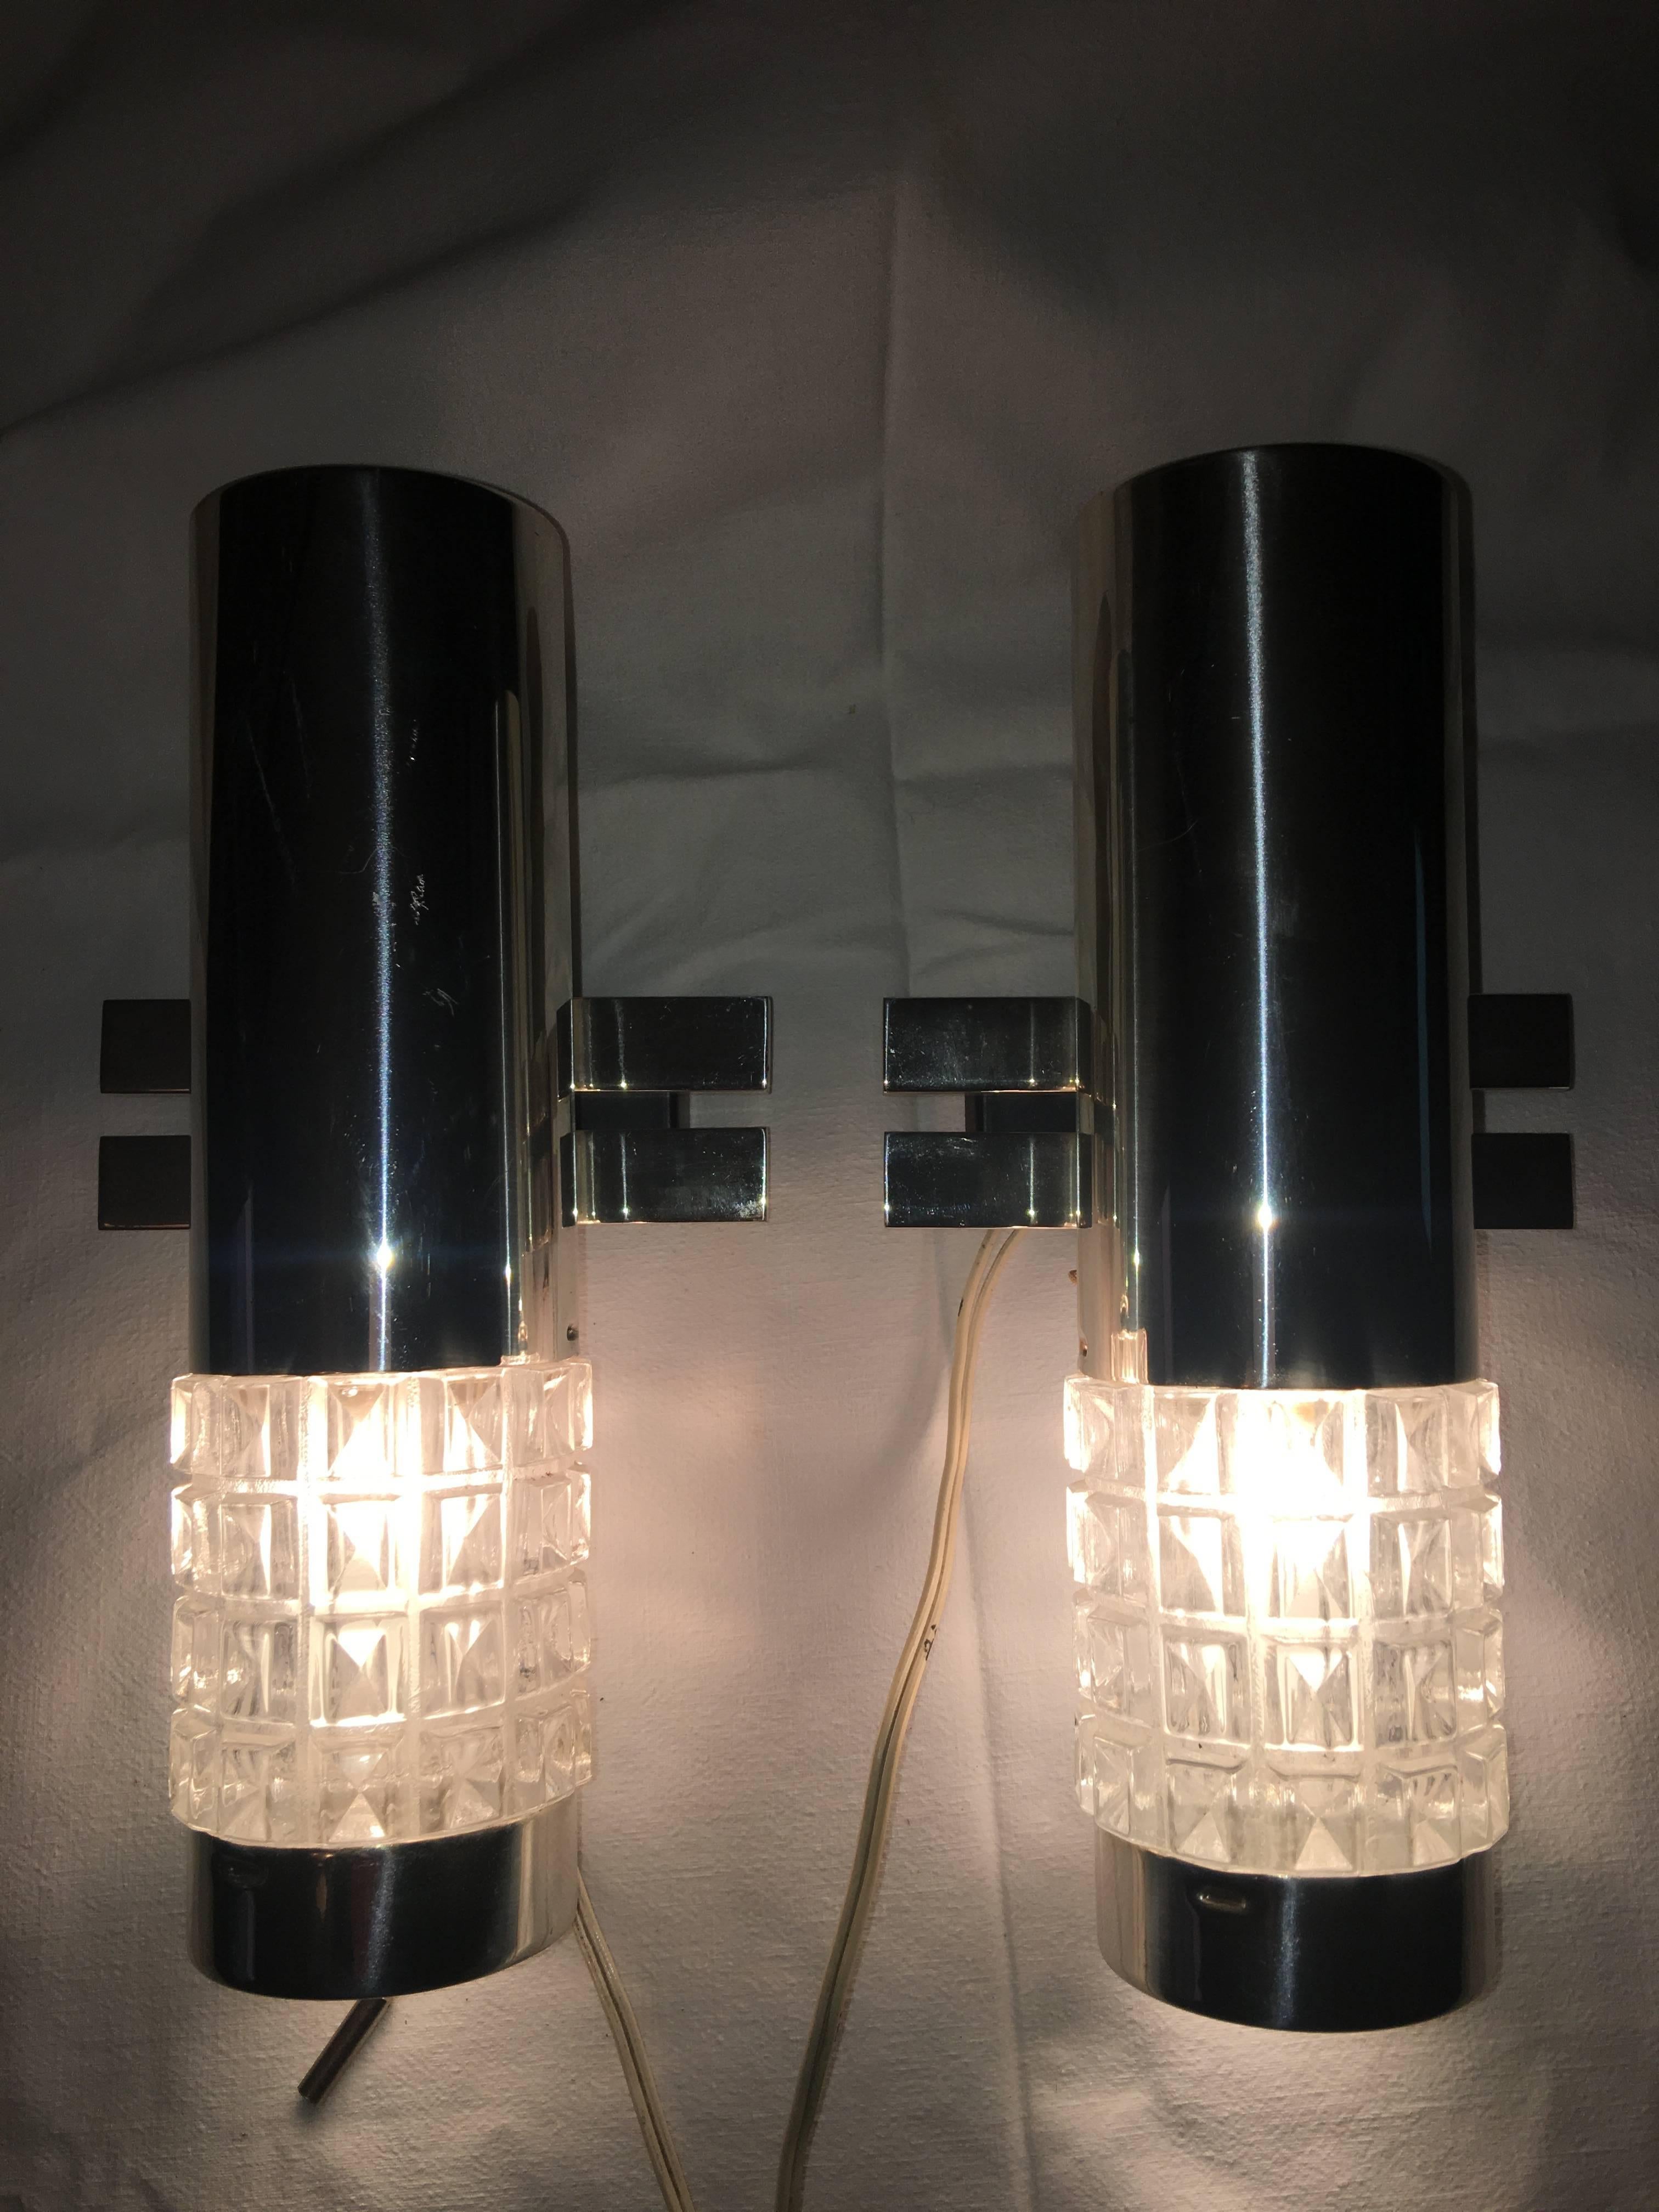 From Kaiser Leuchten of Germany. A pair of great looking 1960s chrome and glass Kaiser sconces. Equipped with on/off switch. Each requires one European E14 candelabra bulb max 40 W. Item will be shipped directly from Germany to buyer.